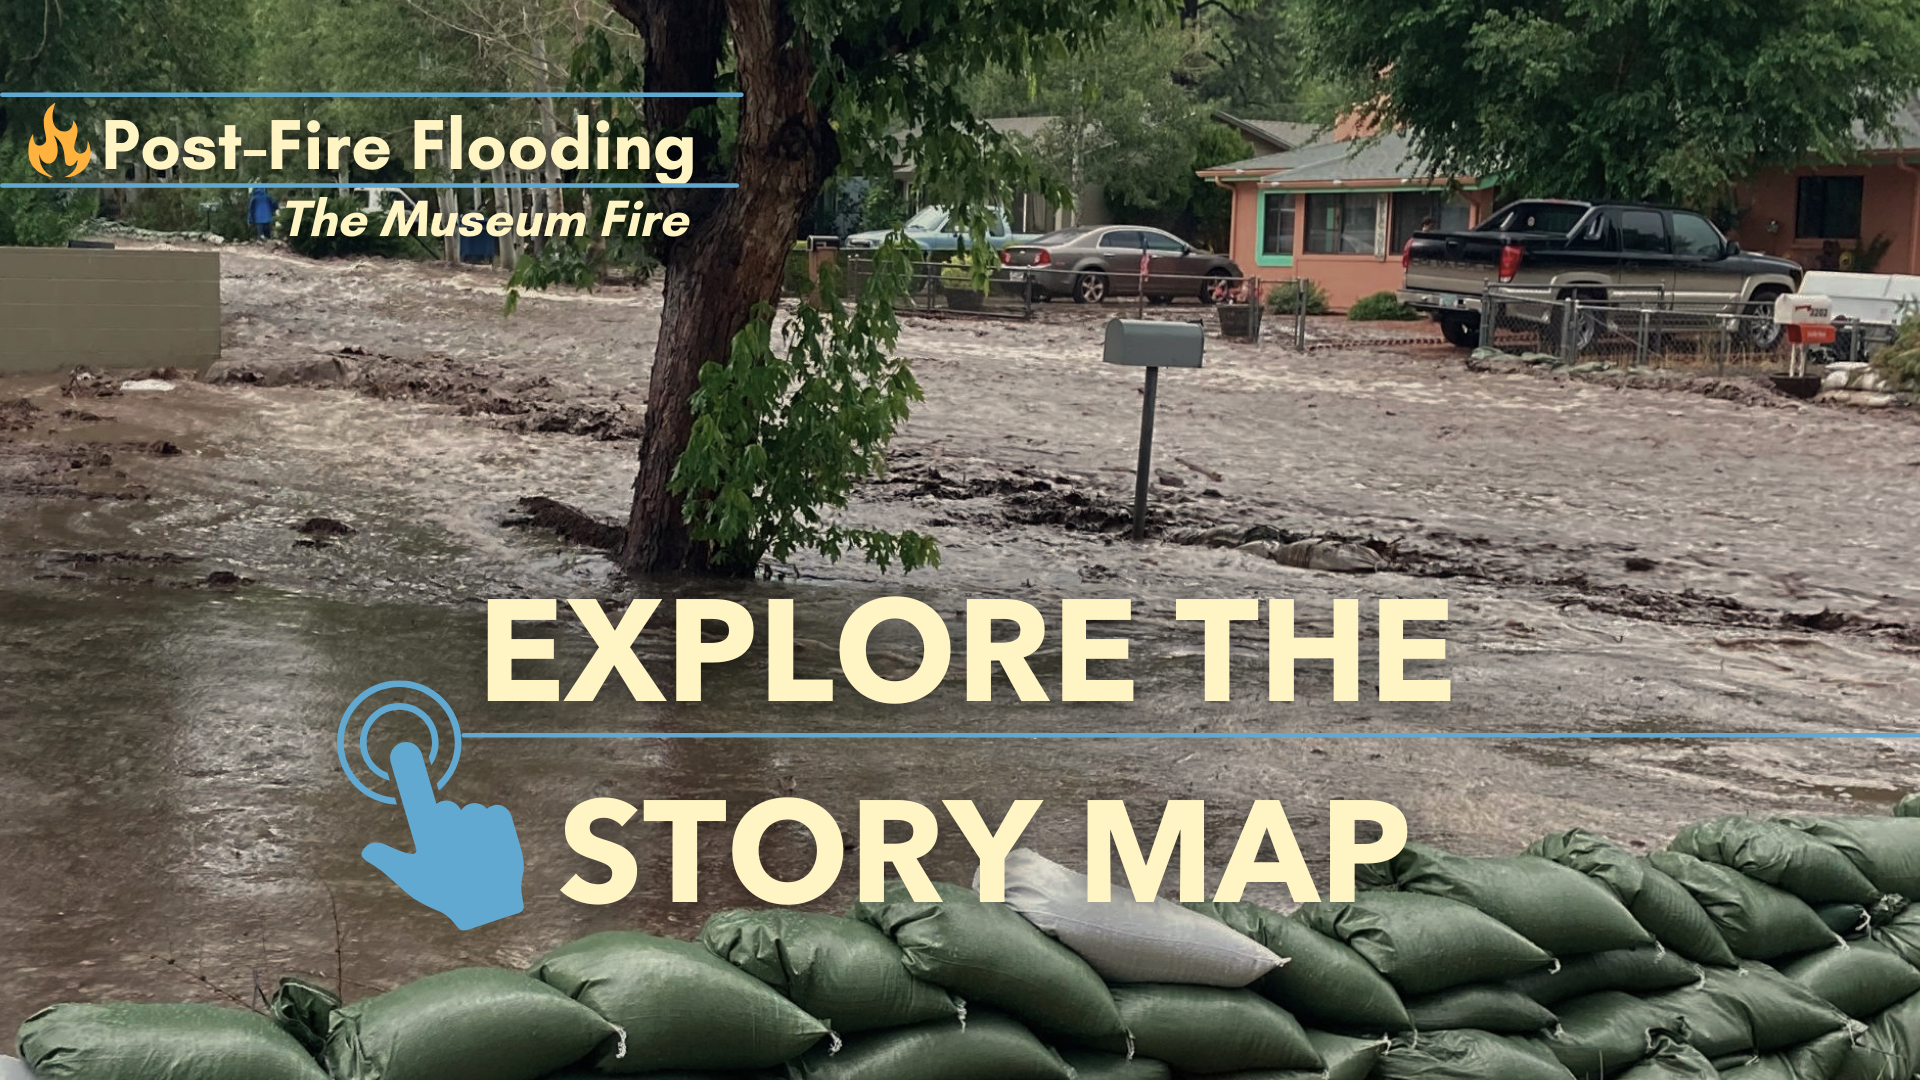 Green sandbags line a residential street that has flooded following the Museum Fire. Image Text reads: "Post Fire Flooding: The Museum Fire" and "Explore the Story Map"